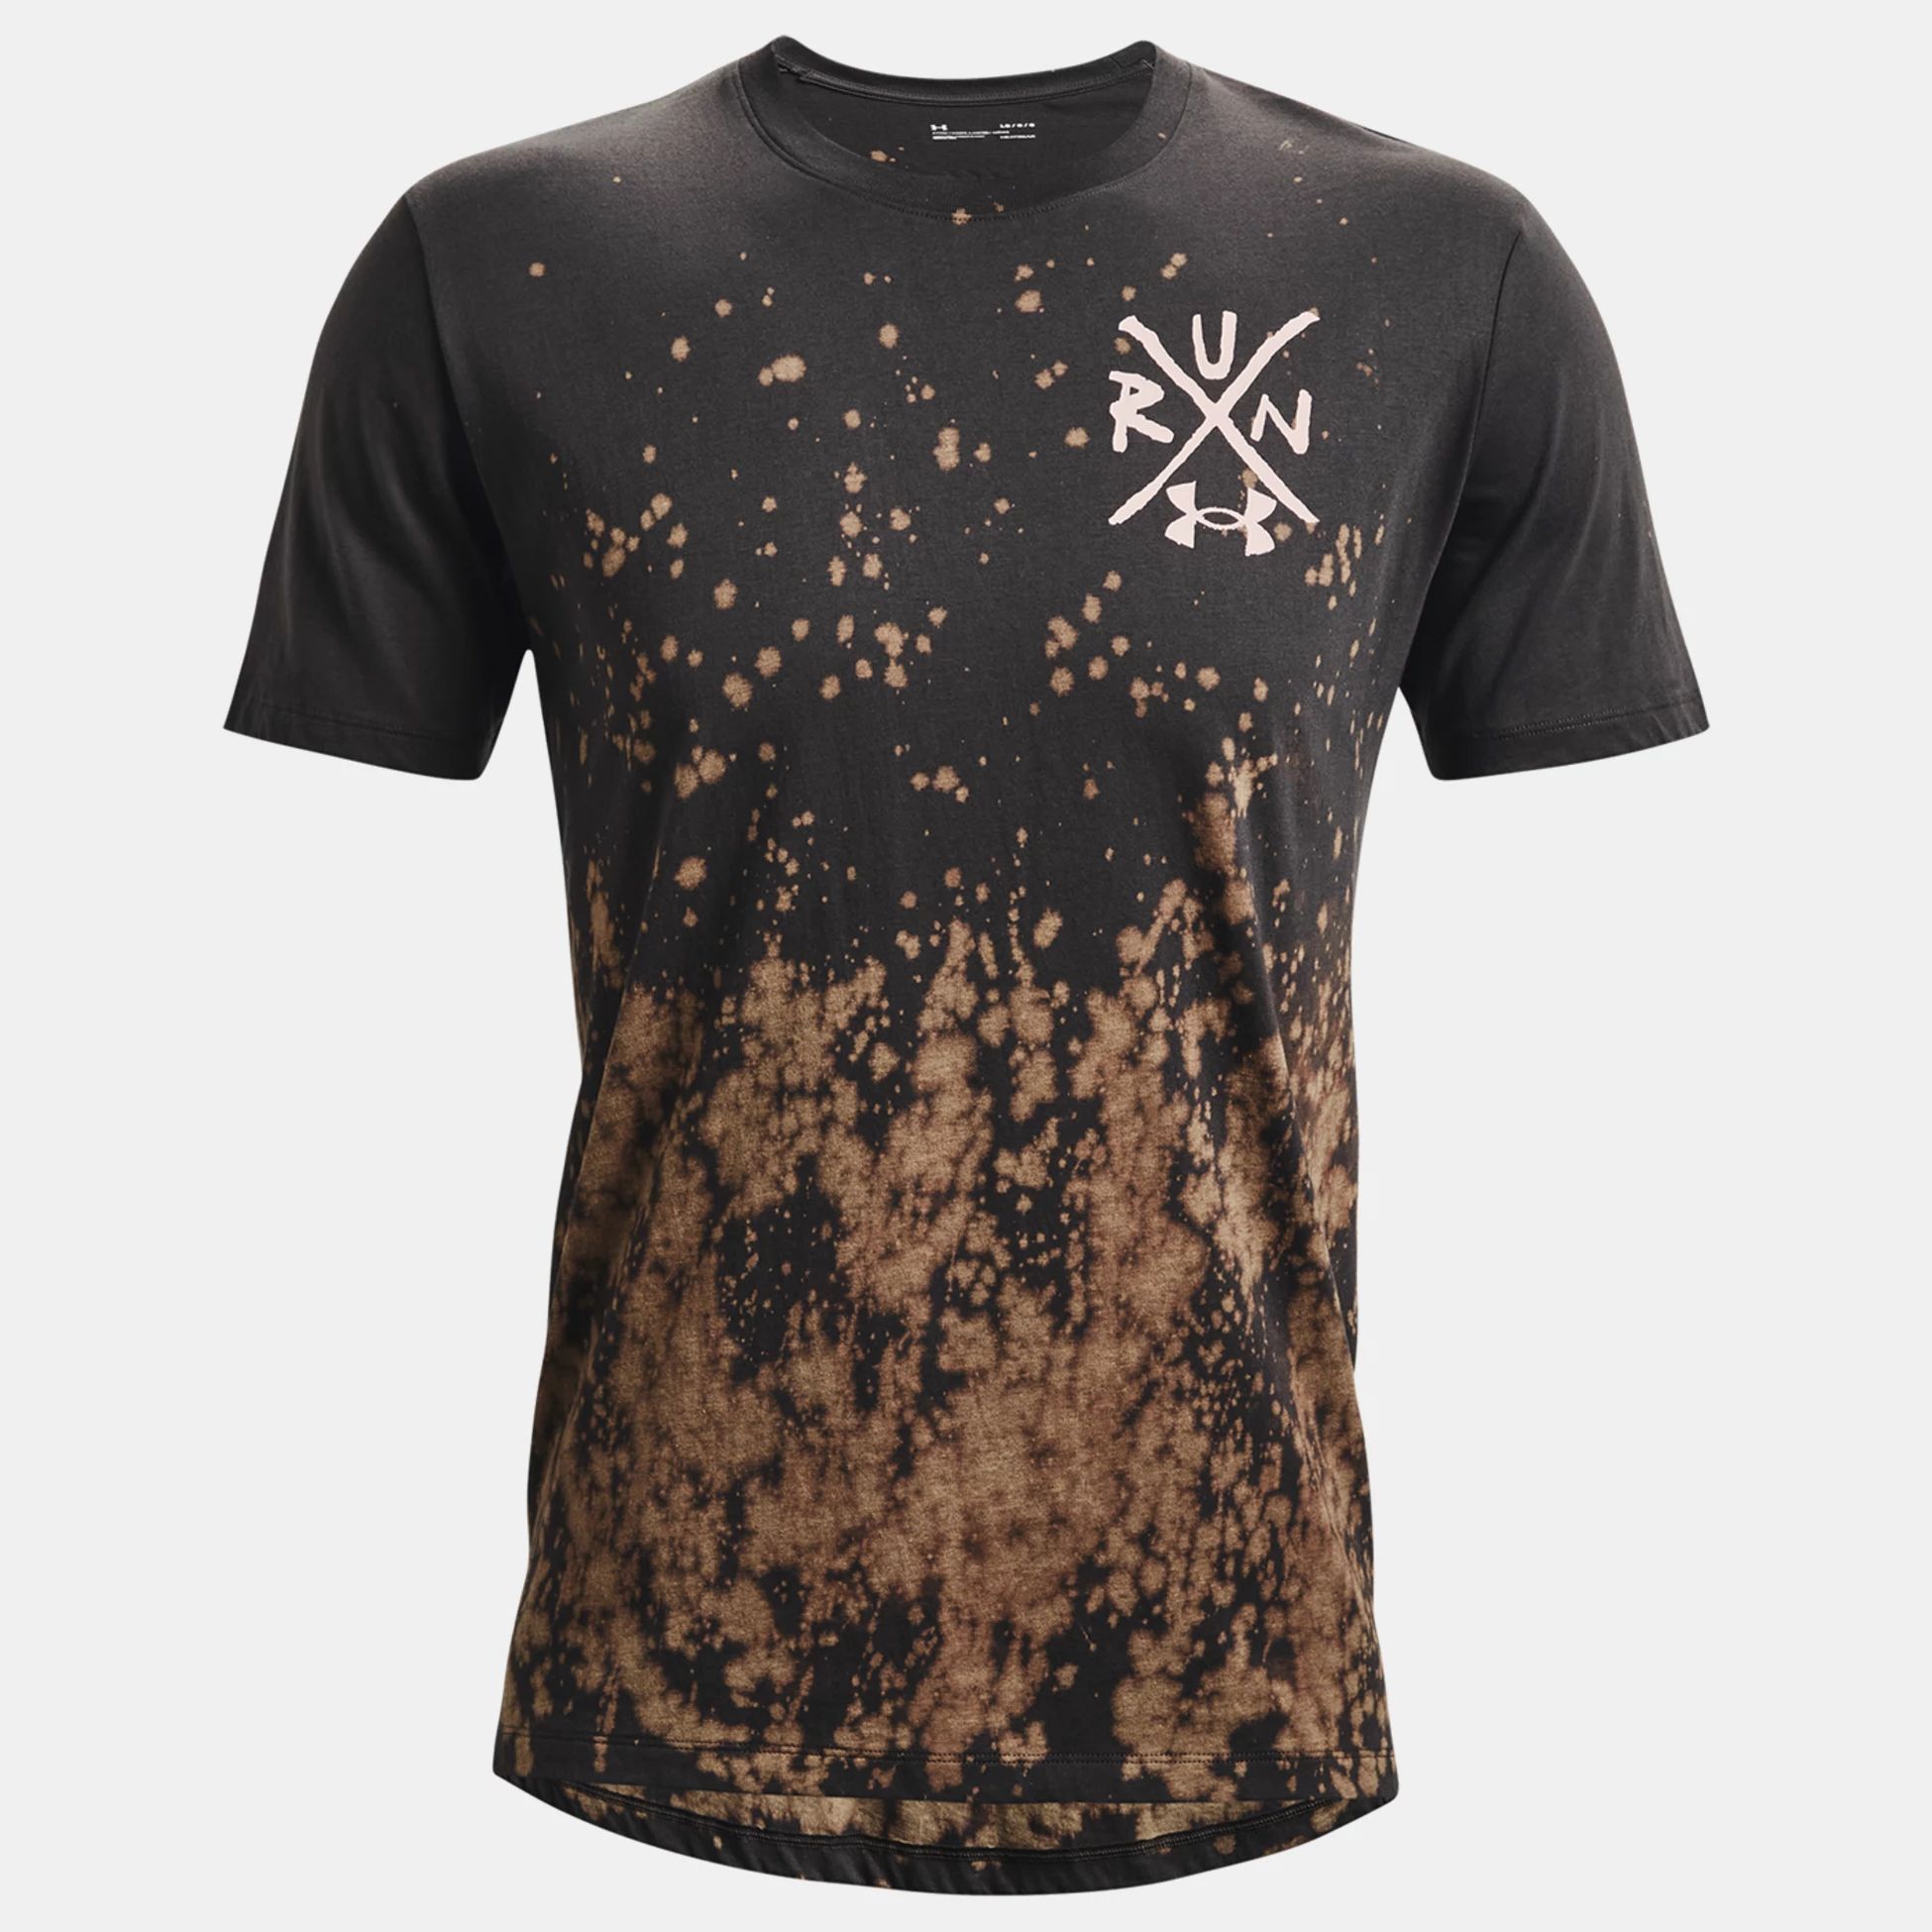 T-Shirts & Polo -  under armour UA Destroy All Miles T-Shirt